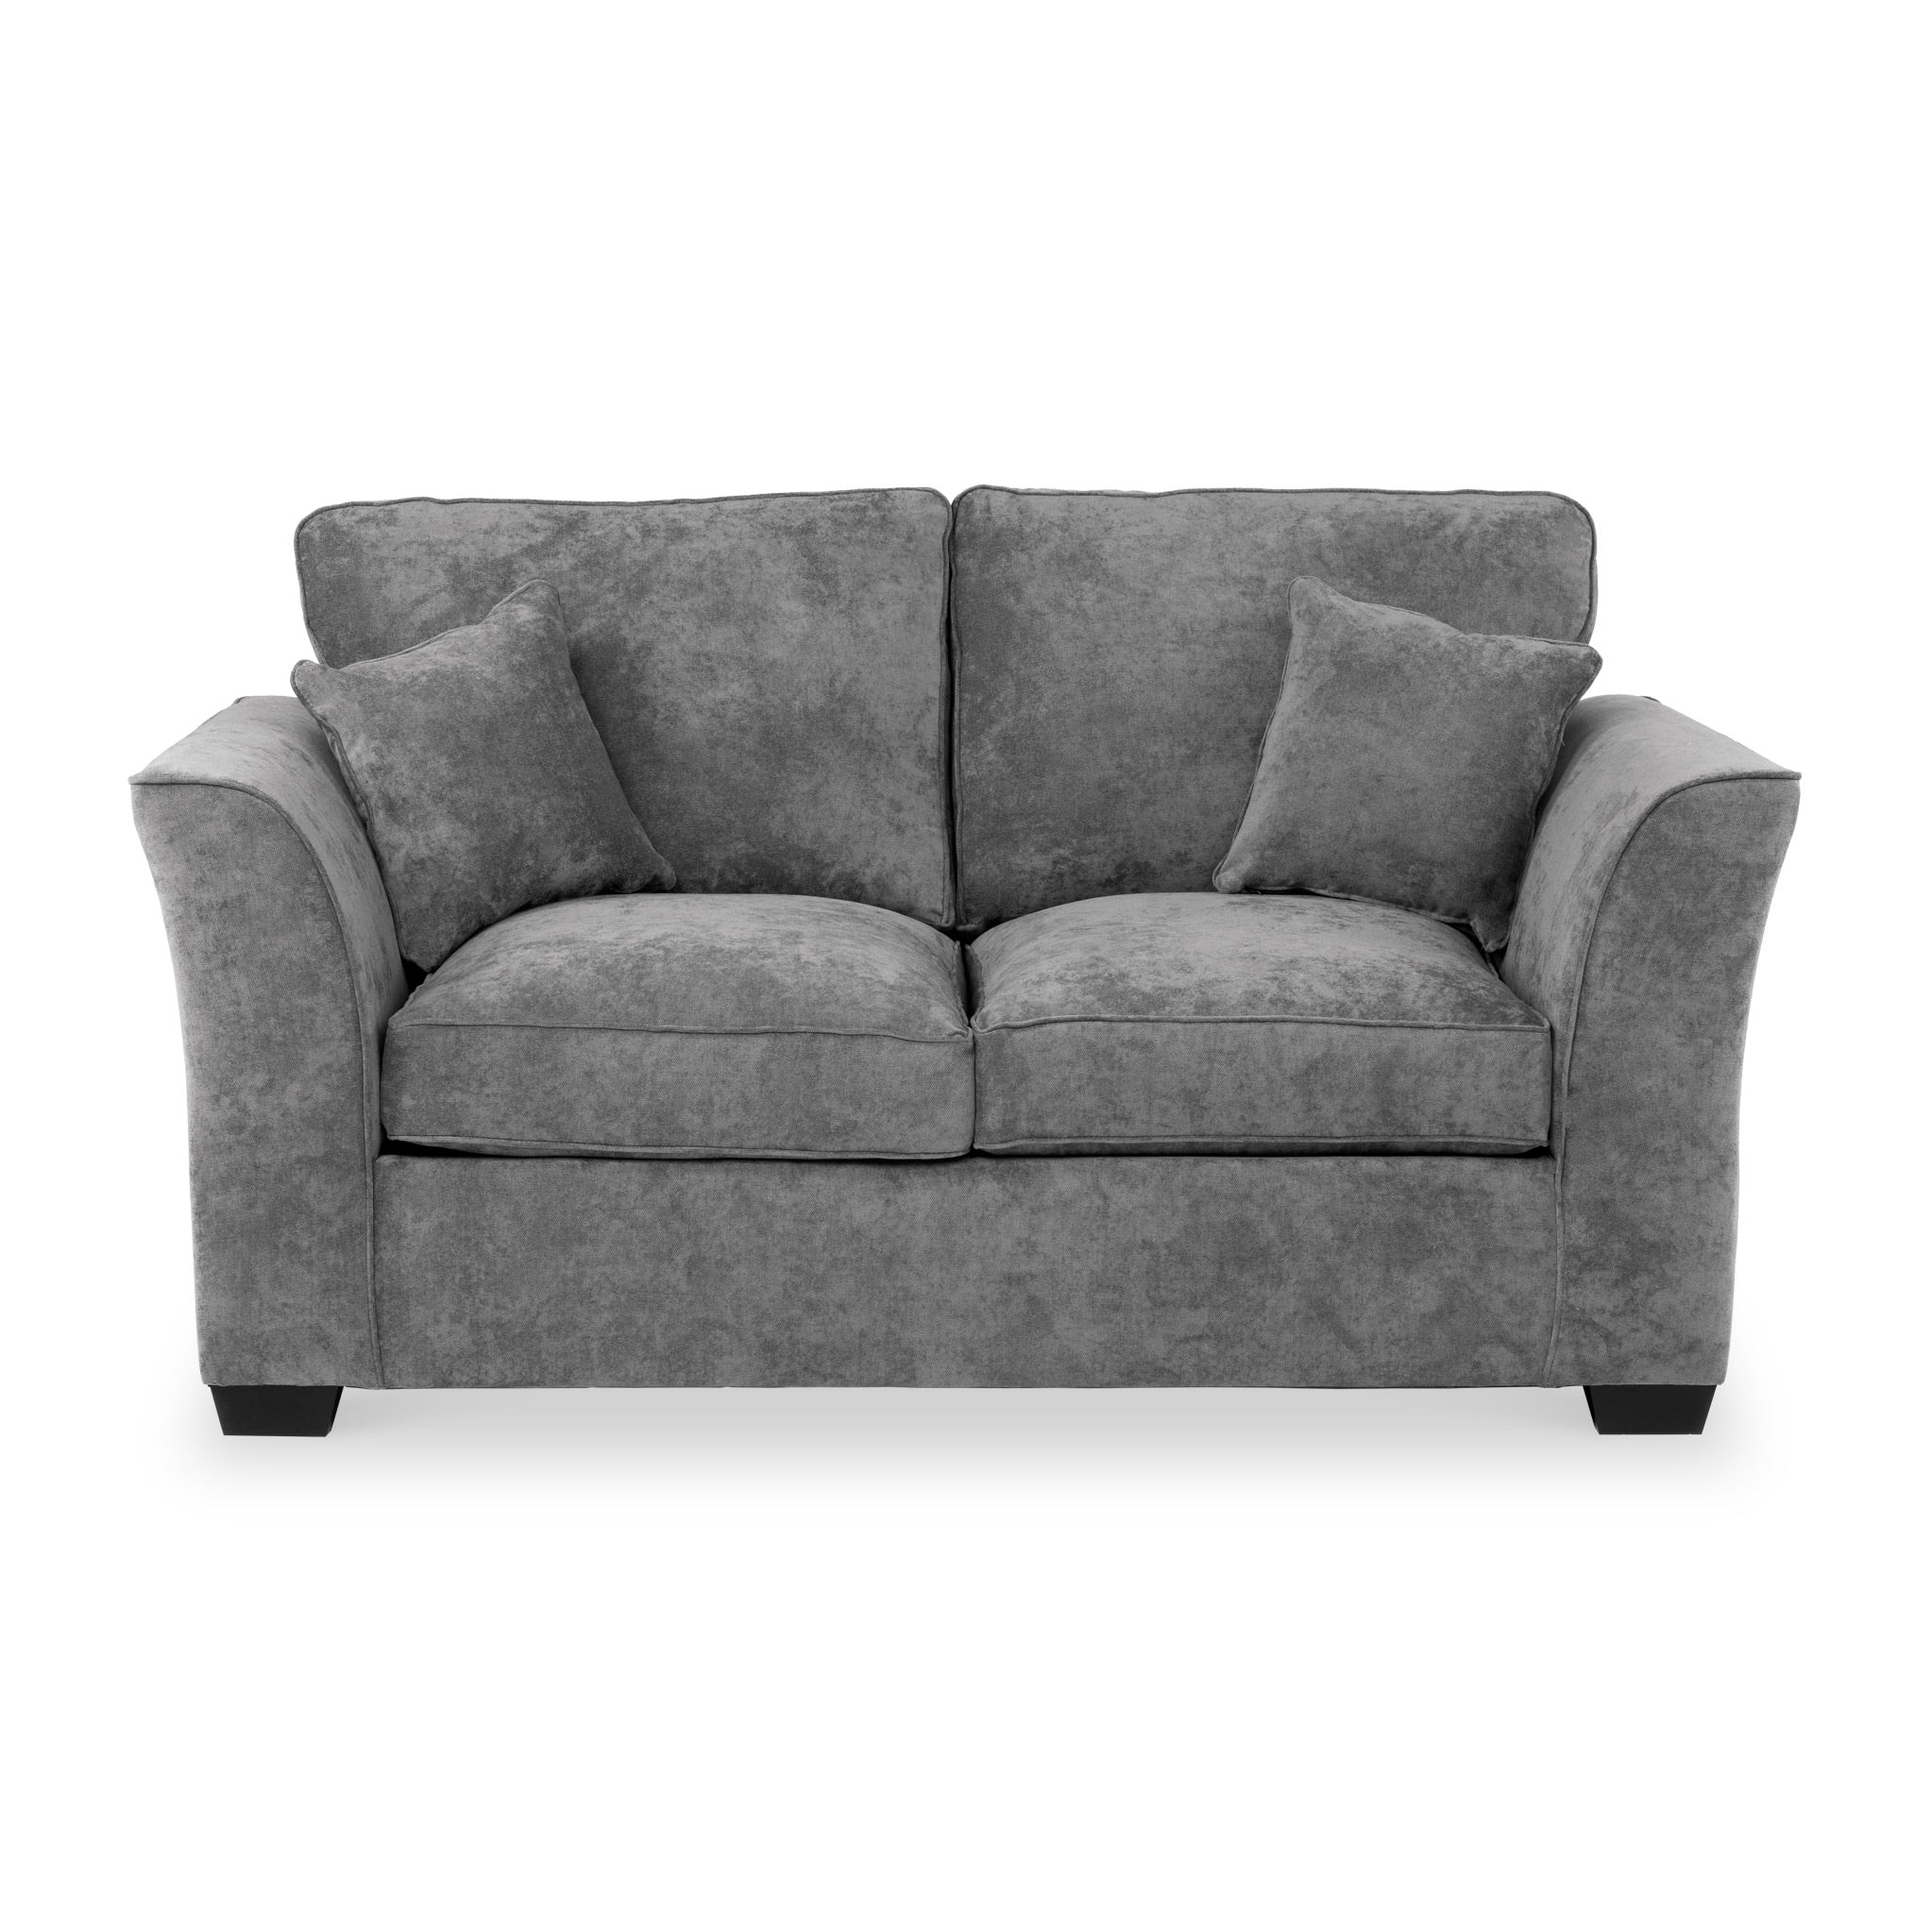 Padstow 2 Seater Sofa Bed Grey Green Blue Fabric Double Guest Bed